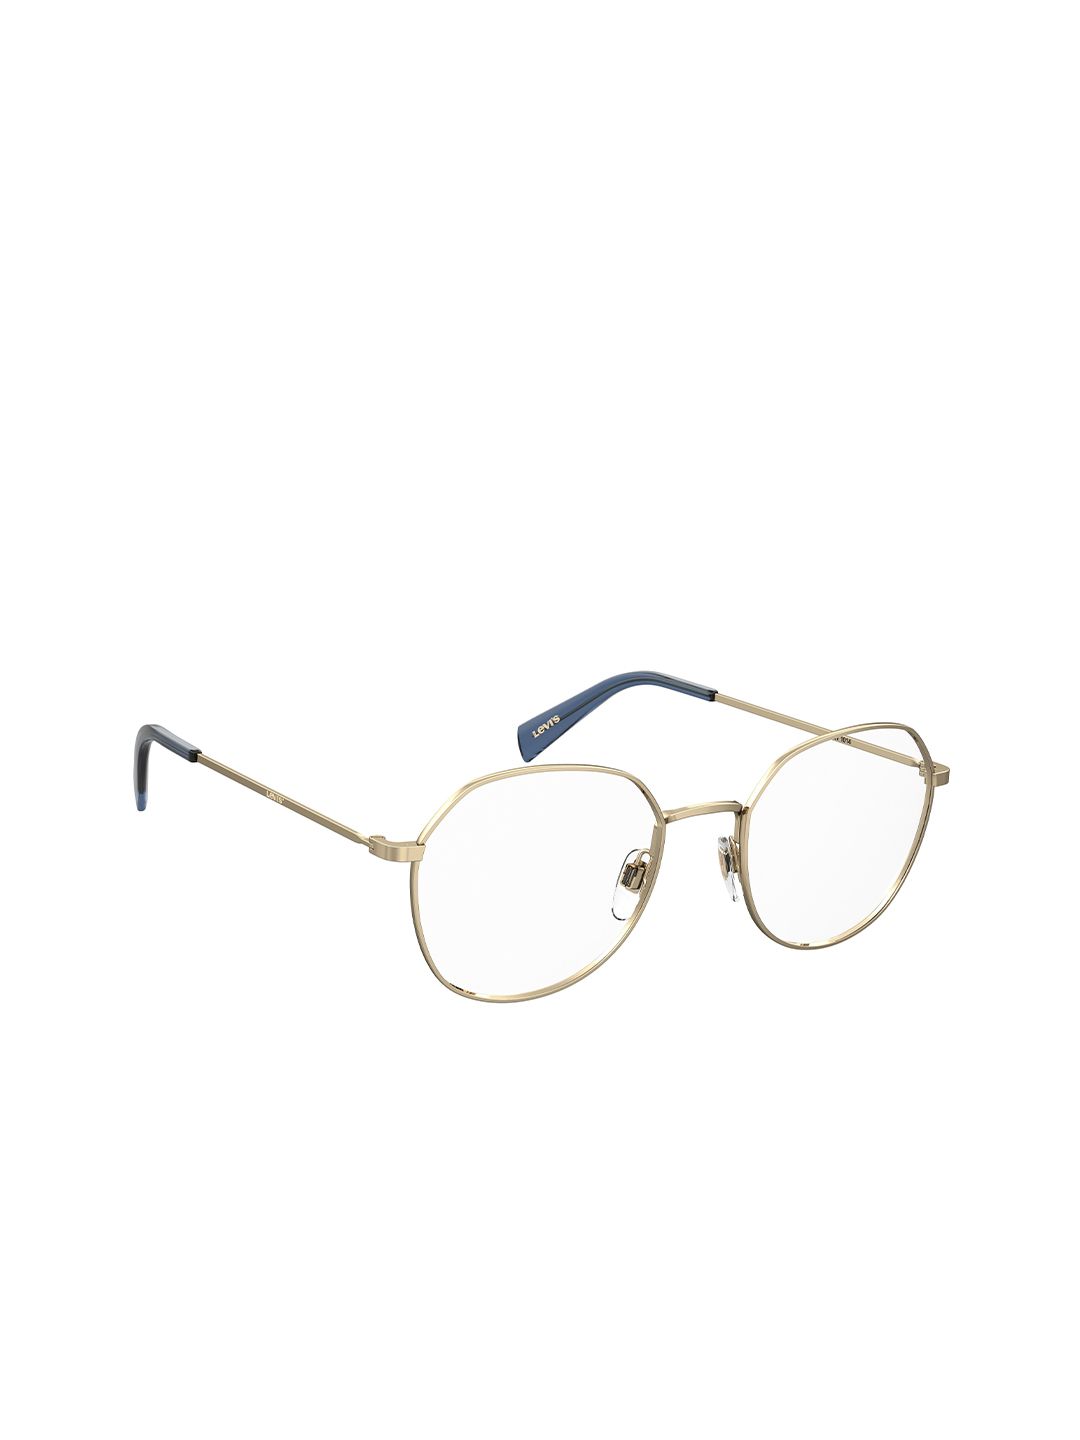 Levis Unisex Clear Lens & Gold-Toned Aviator Sunglasses with Polarised Lens Price in India